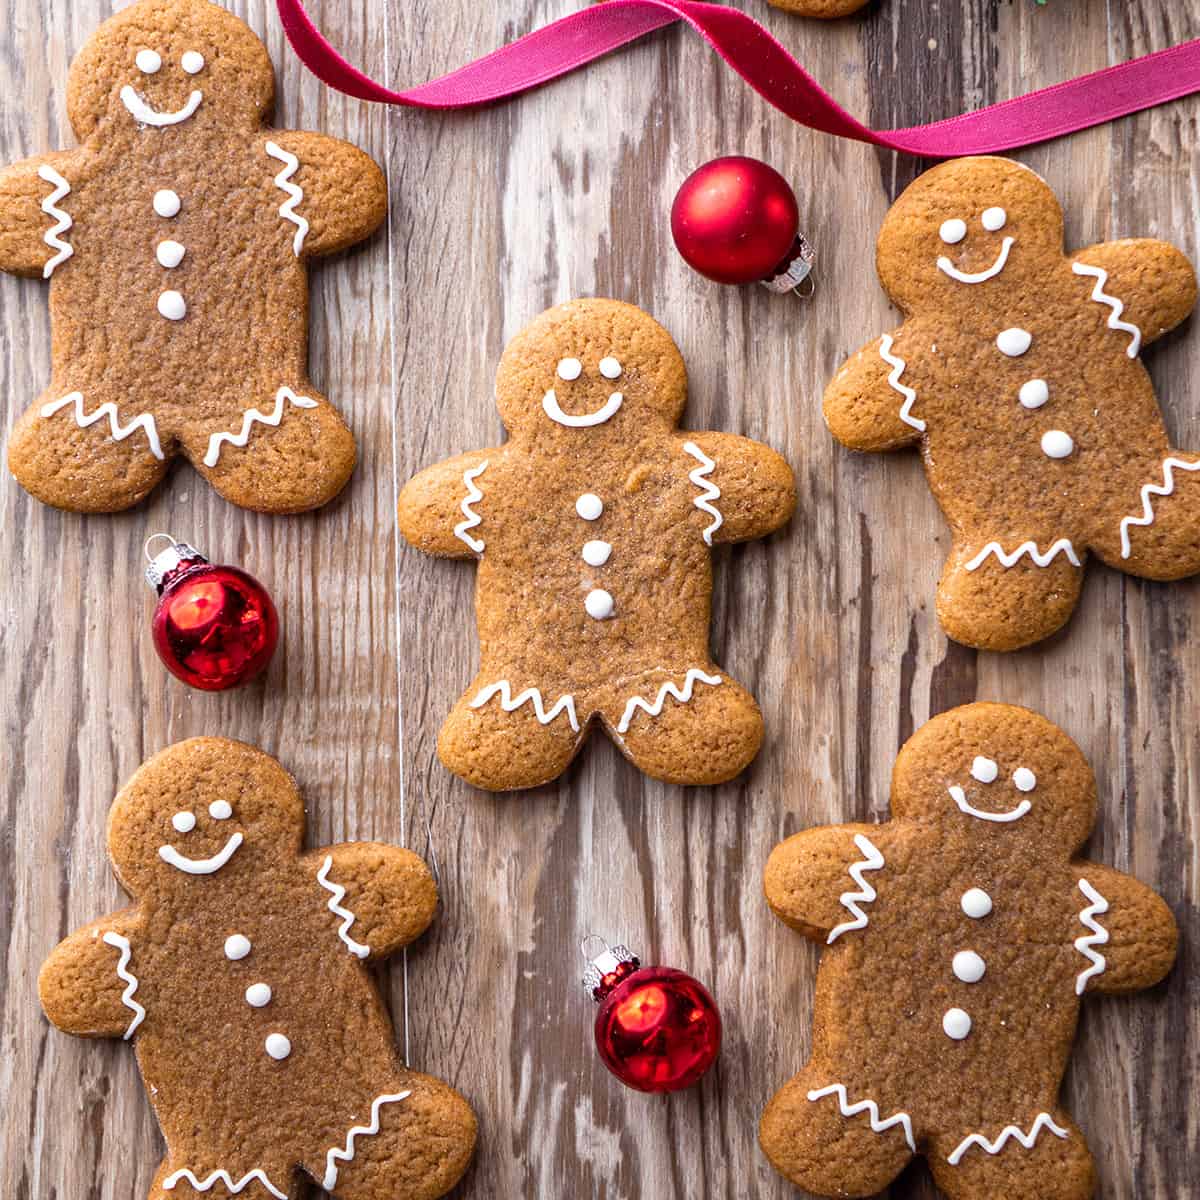 5 Gingerbread men Cookies decorated with glaze